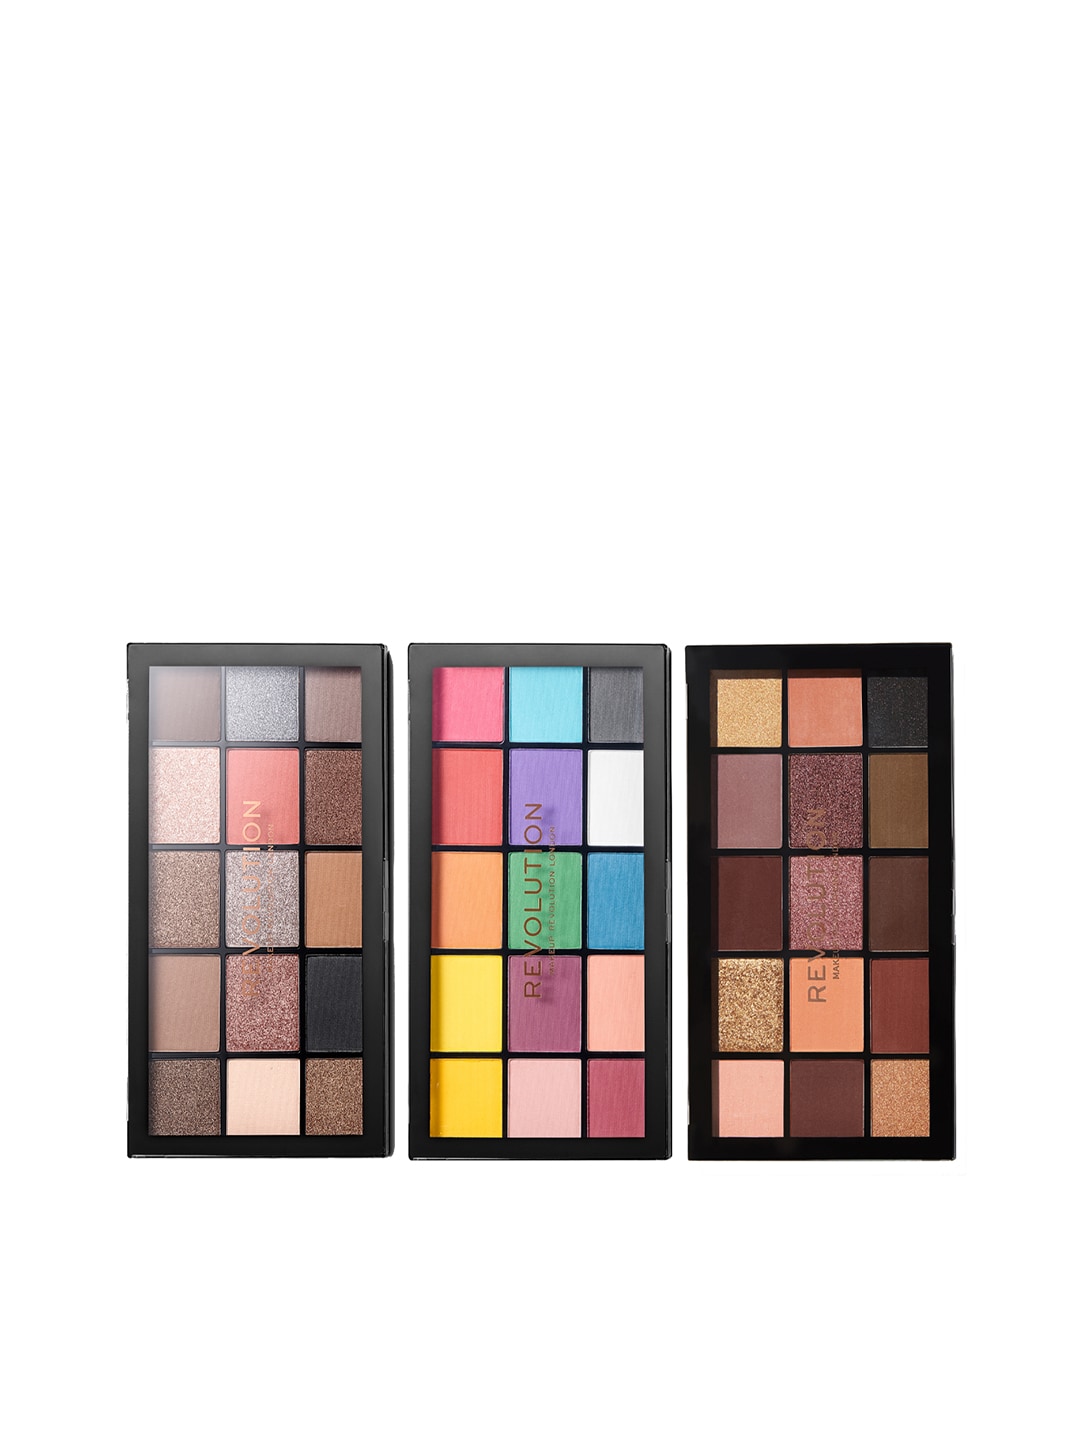 Makeup Revolution London Set of 3 Reloaded Eyeshadow Palettes Price in  India, Full Specifications & Offers 